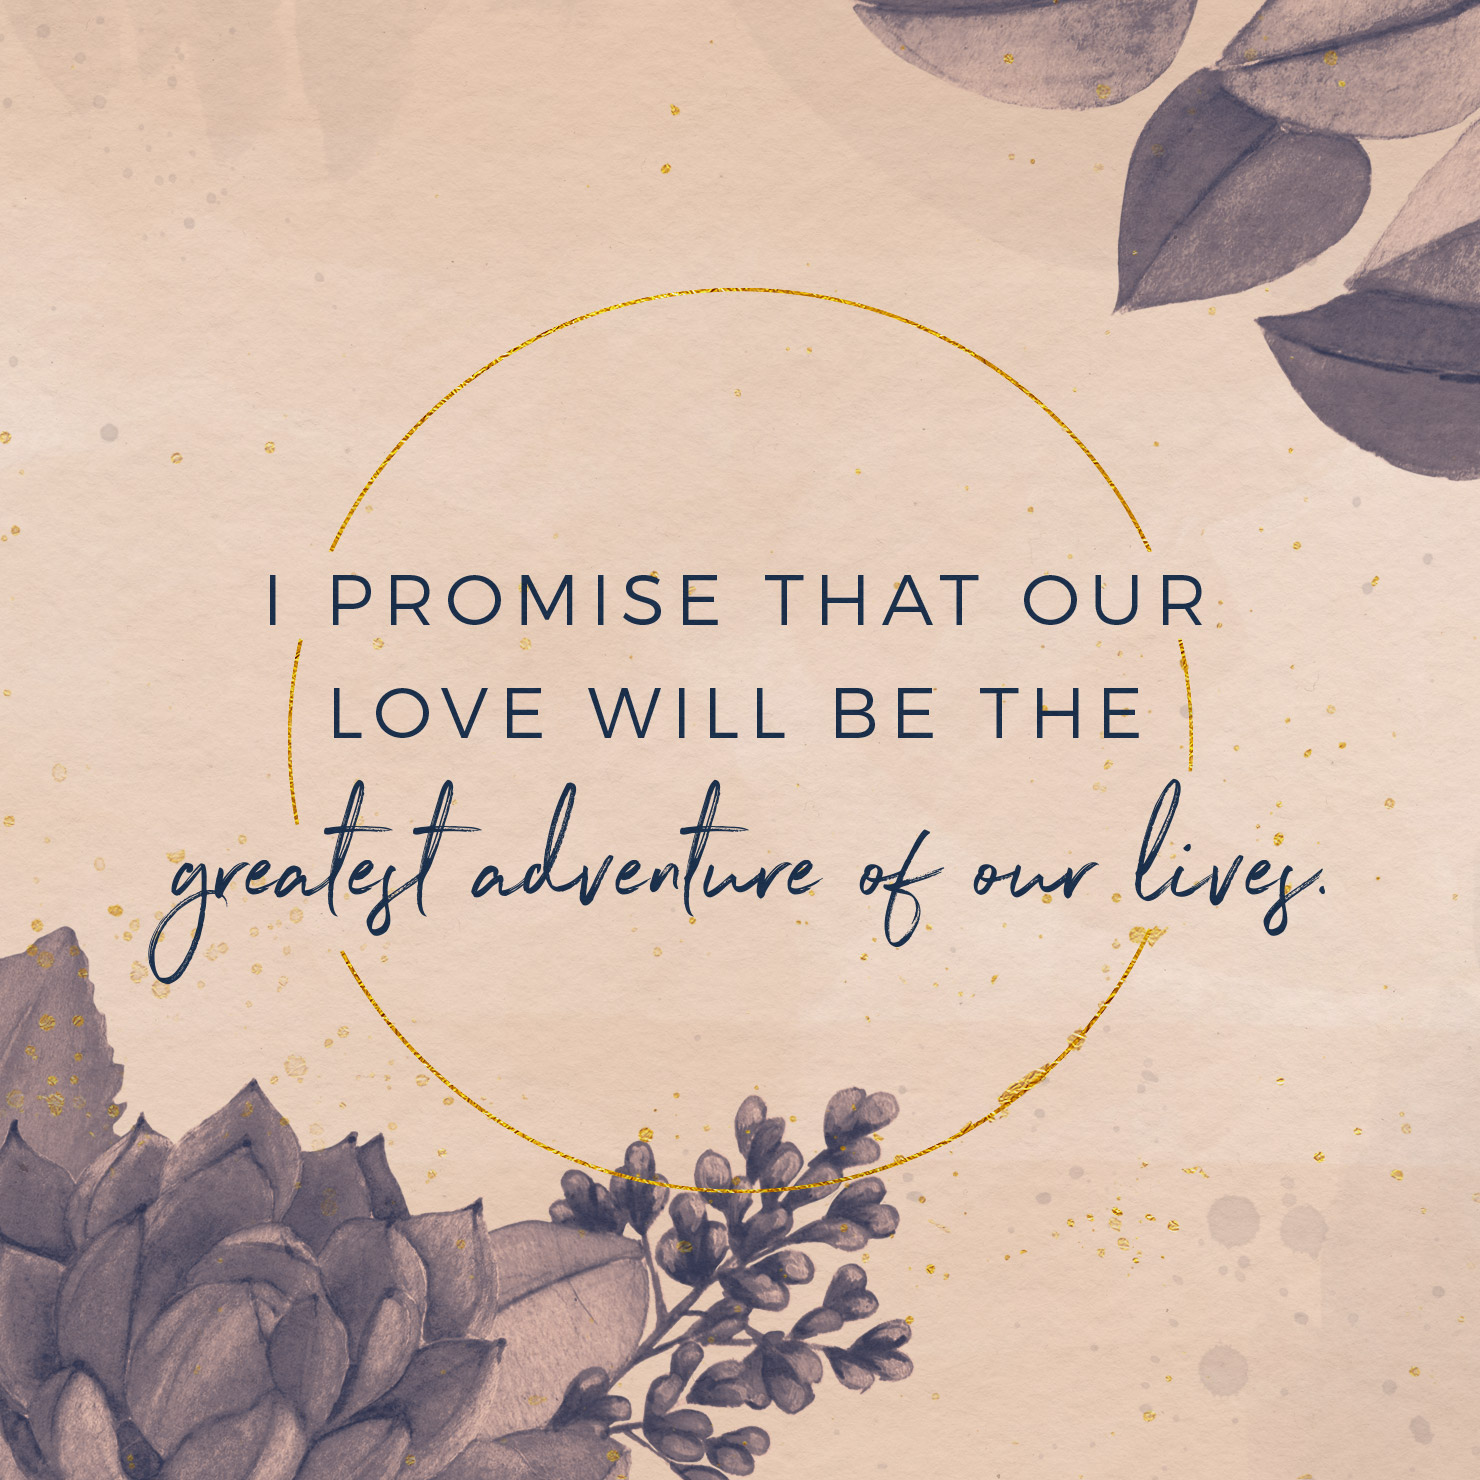 I promise that our love will be the greatest adventure of our lives.